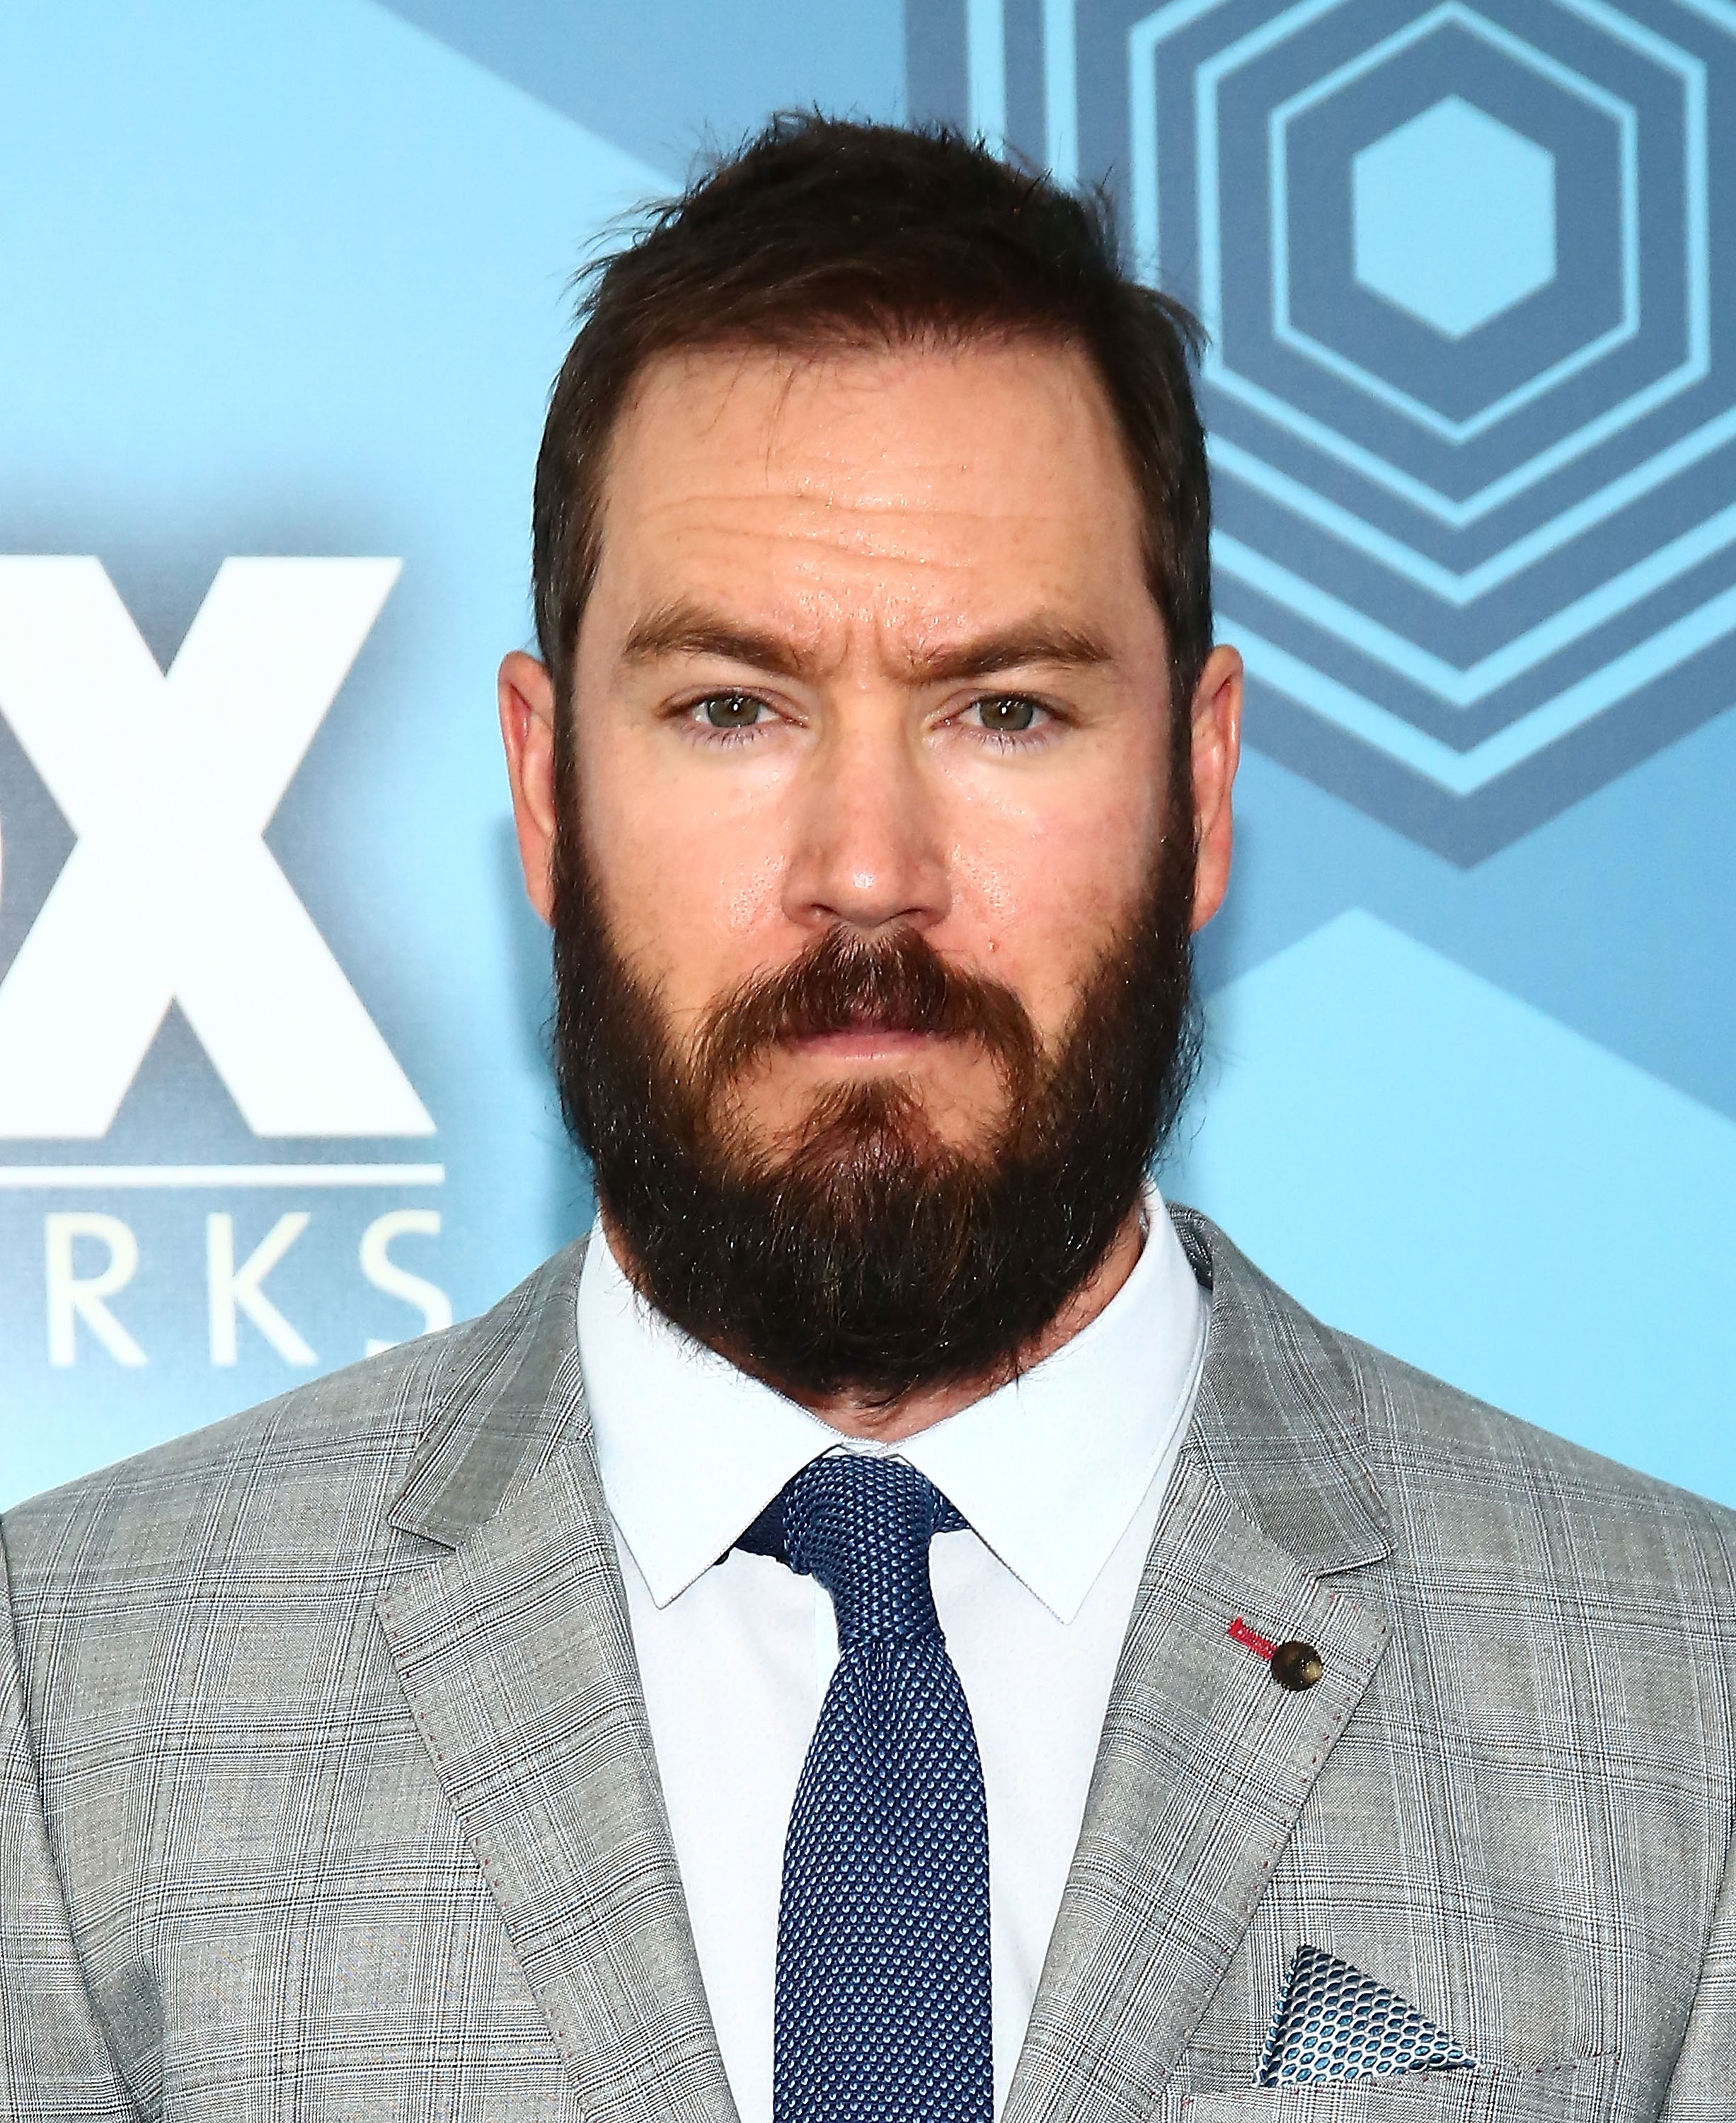 NEW YORK, NY - MAY 16: Actor Mark-Paul Gosselaar attends FOX 2016 Upfront Arrivals at Wollman Rink, Central Park on May 16, 2016 in New York City. (Photo by Astrid Stawiarz/Getty Images)